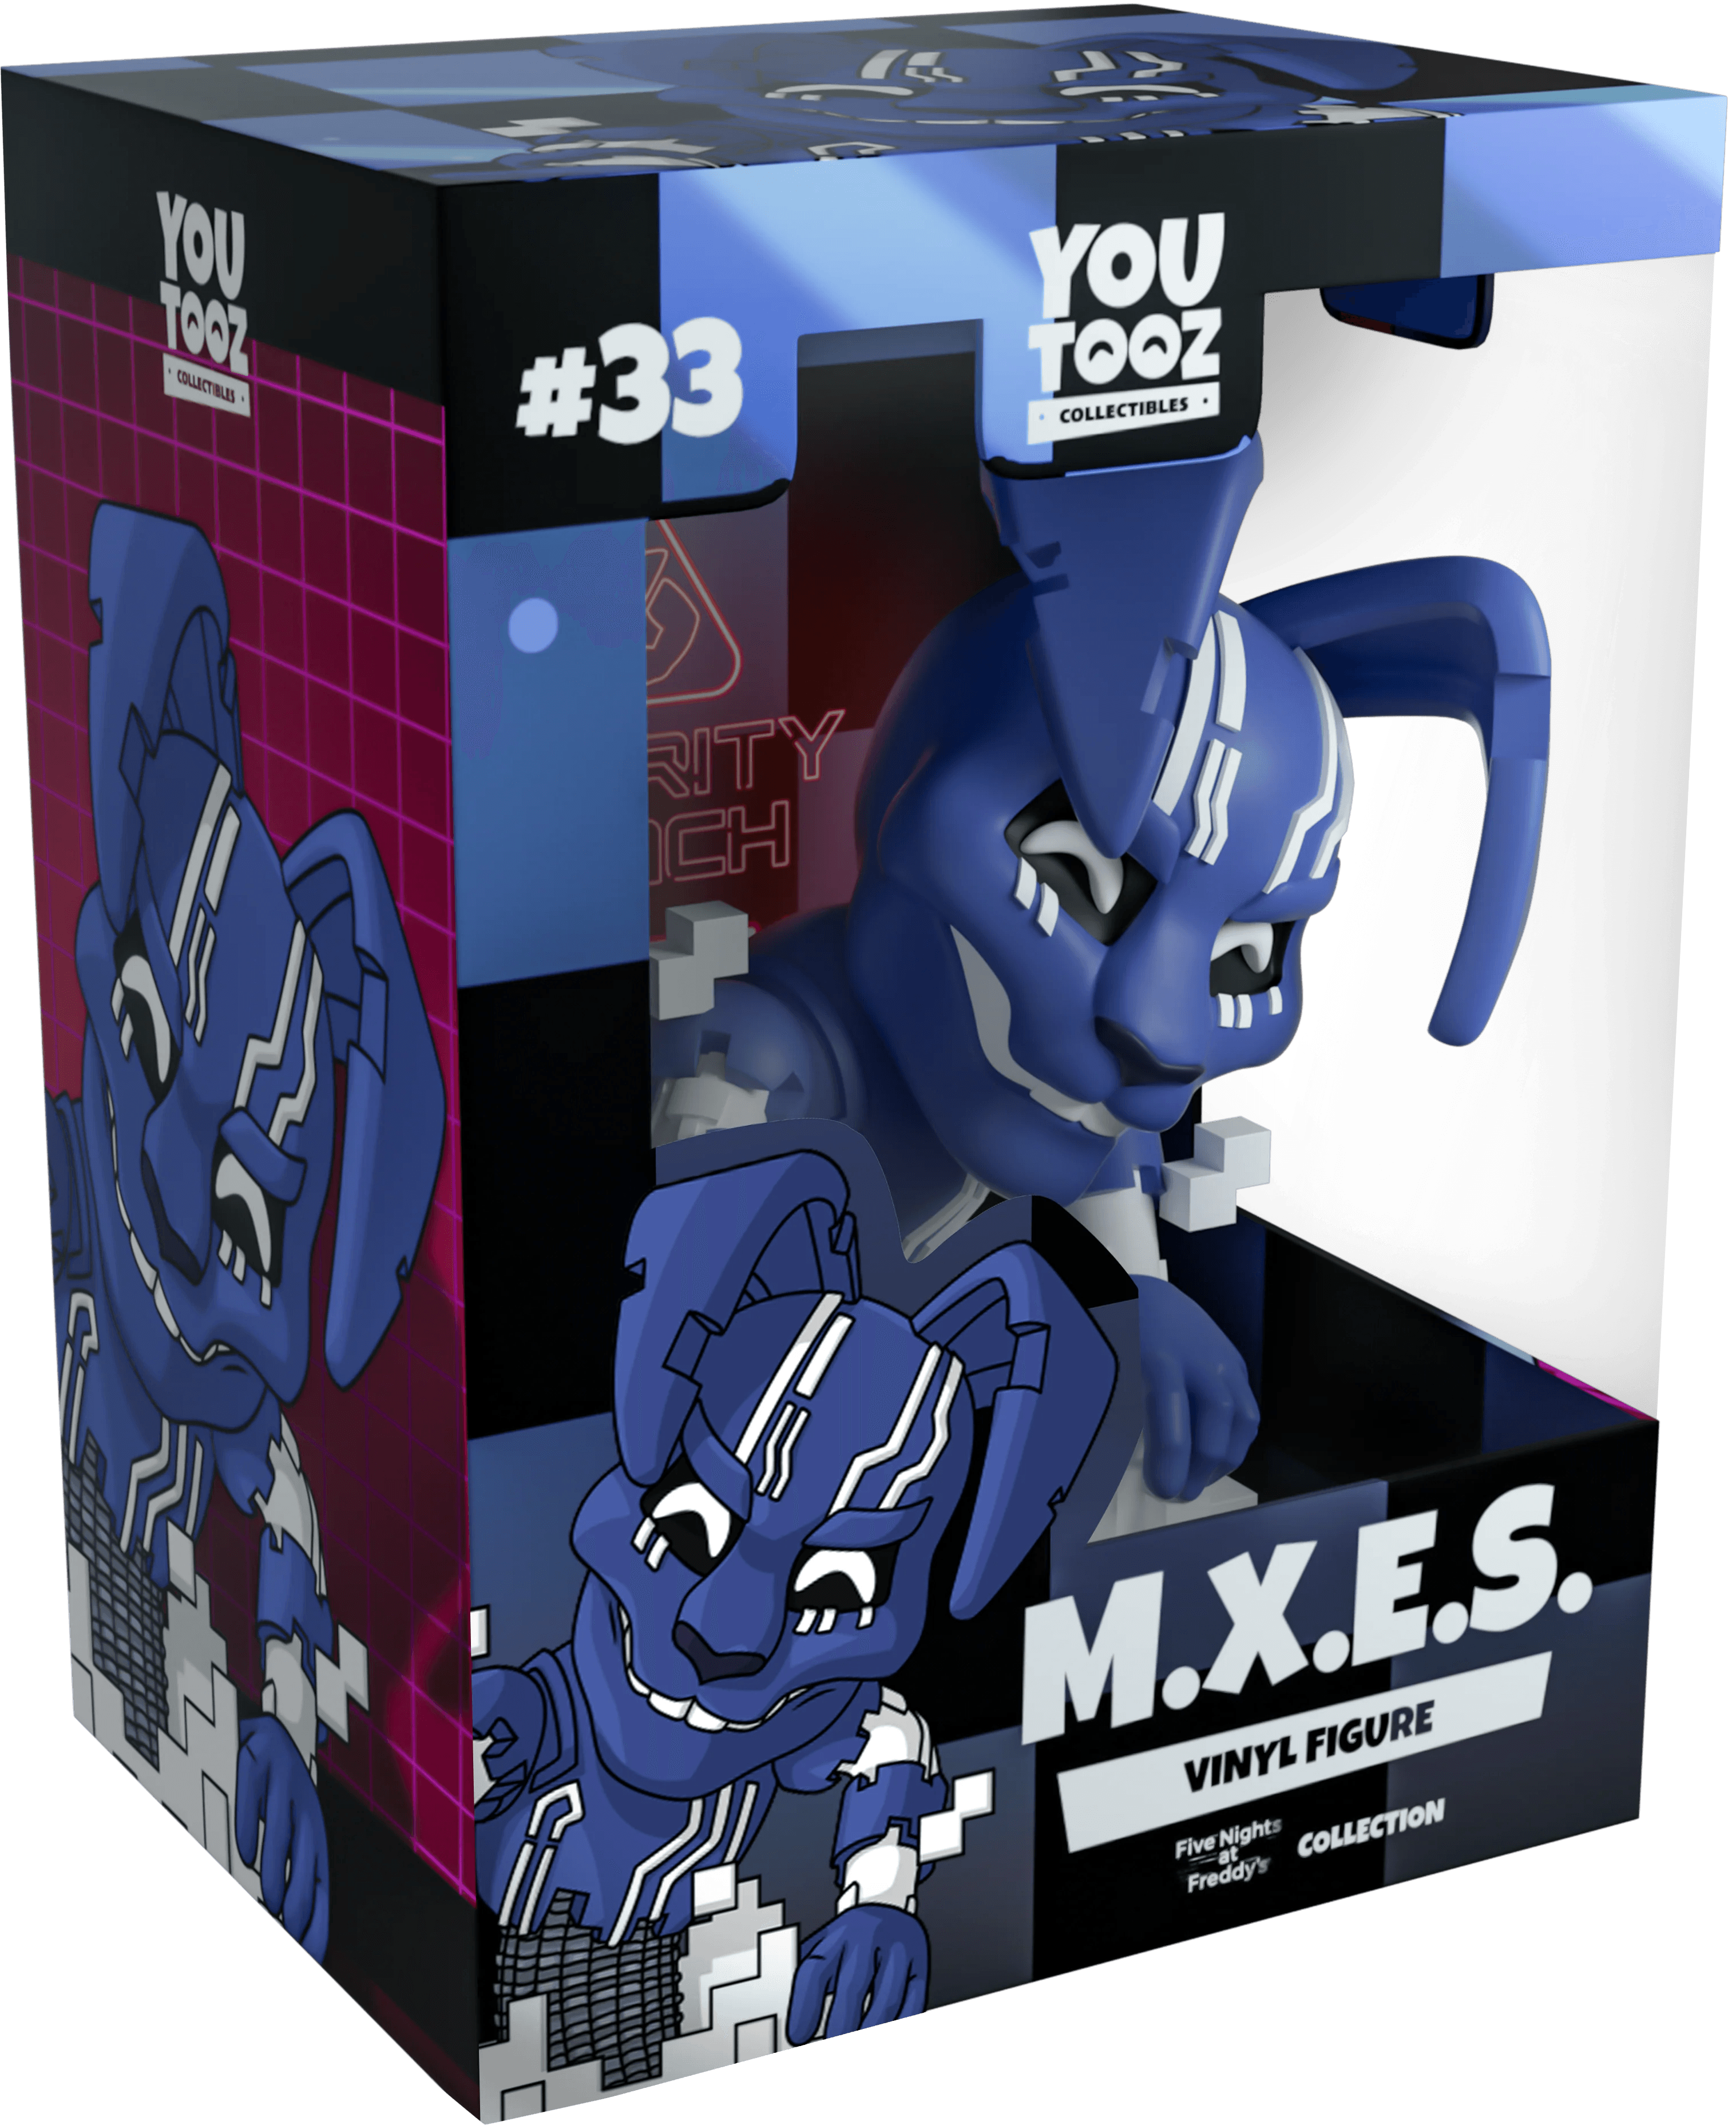 Youtooz - Five Nights at Freddy’s - M.X.E.S. Vinyl Figure #33 - The Card Vault